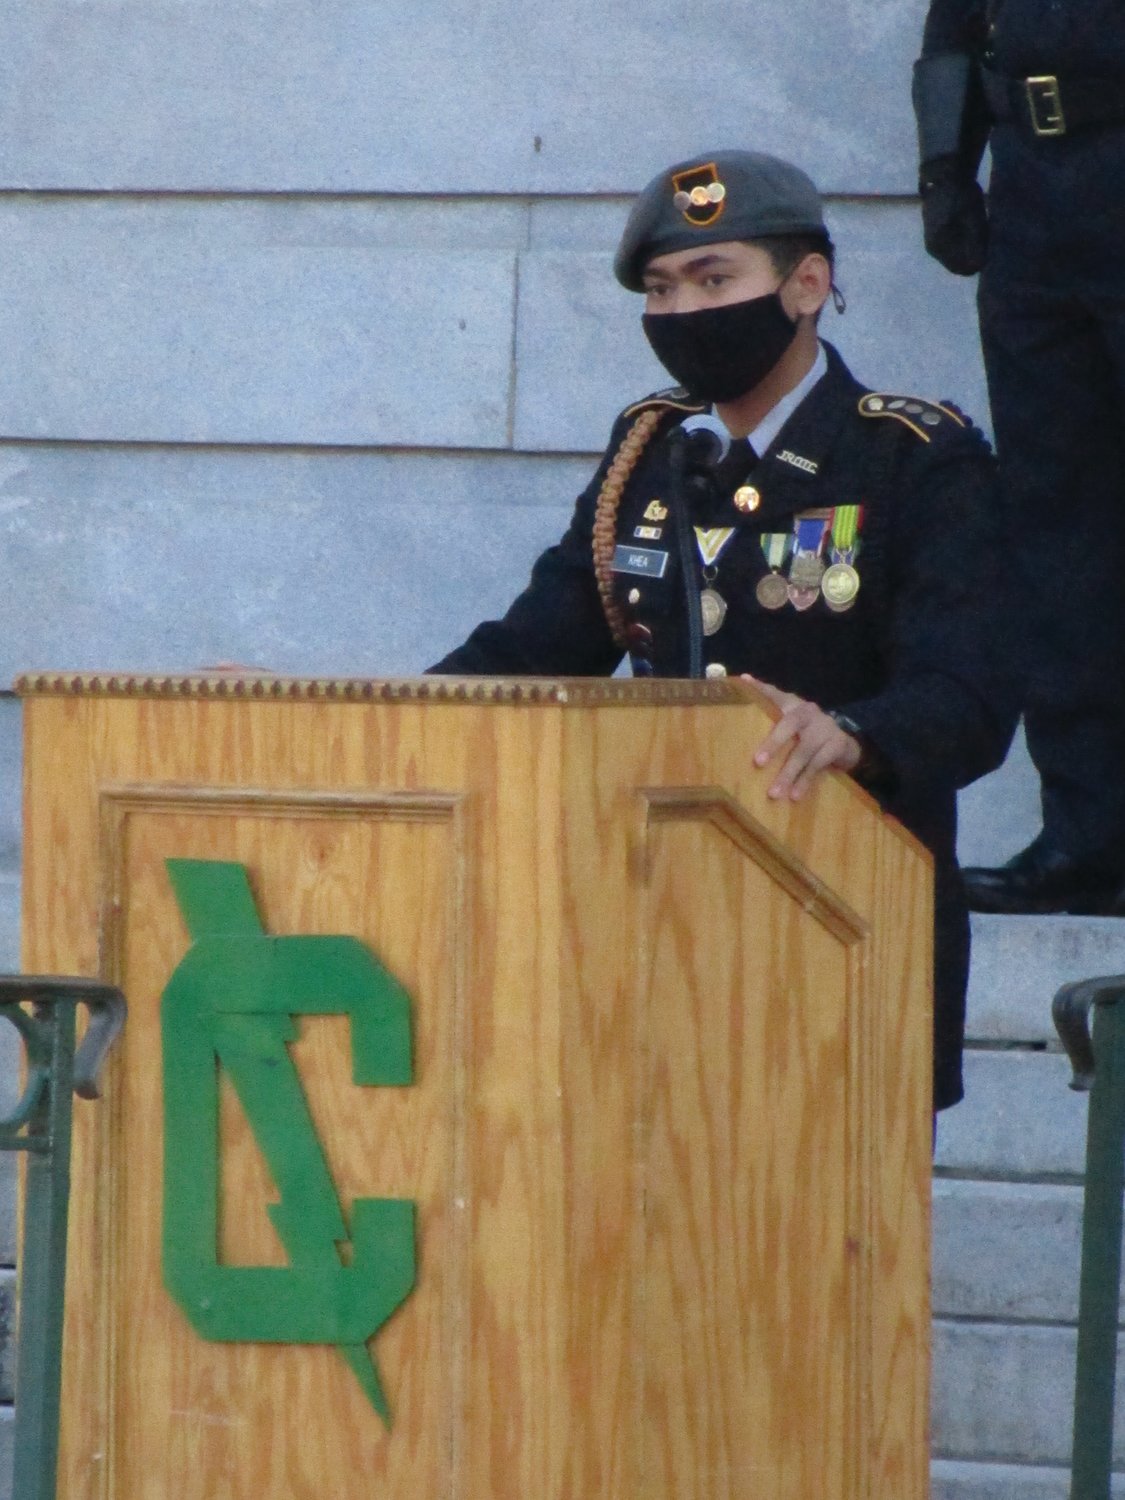 STUDENTS IN SERVICE:Cadet Lt. Col. J’ly Khea, battalion commander of the JROTC at Cranston East, addresses those on hand for Saturday’s ceremony.